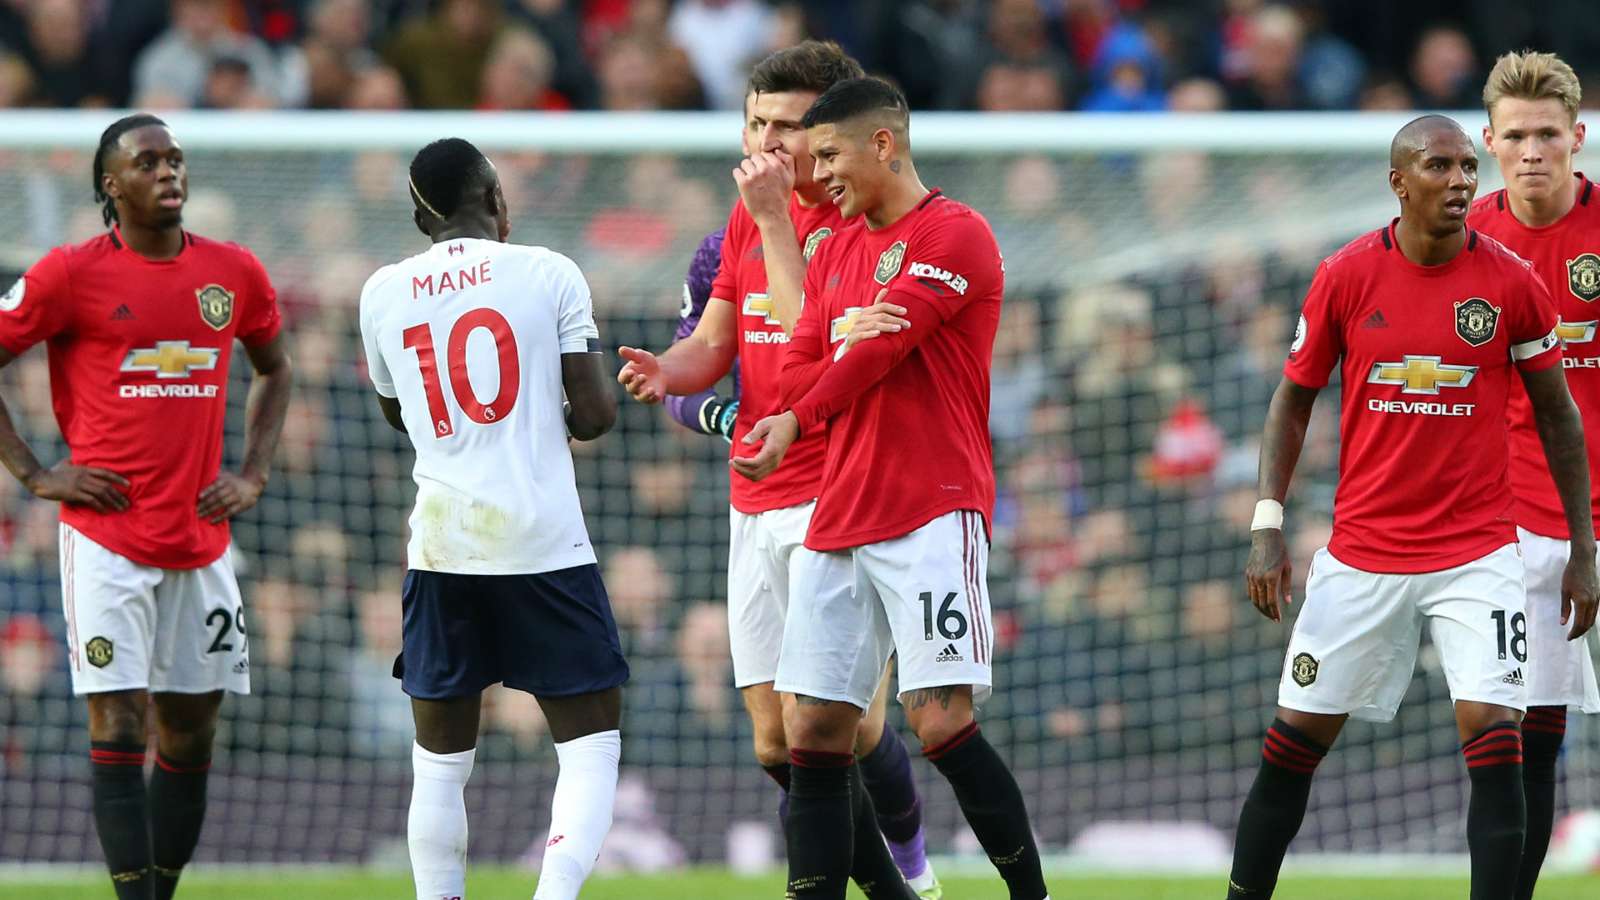 Man United vs Liverpool [1-1] Player Ratings : EPL 19/20 Round 9 | Man